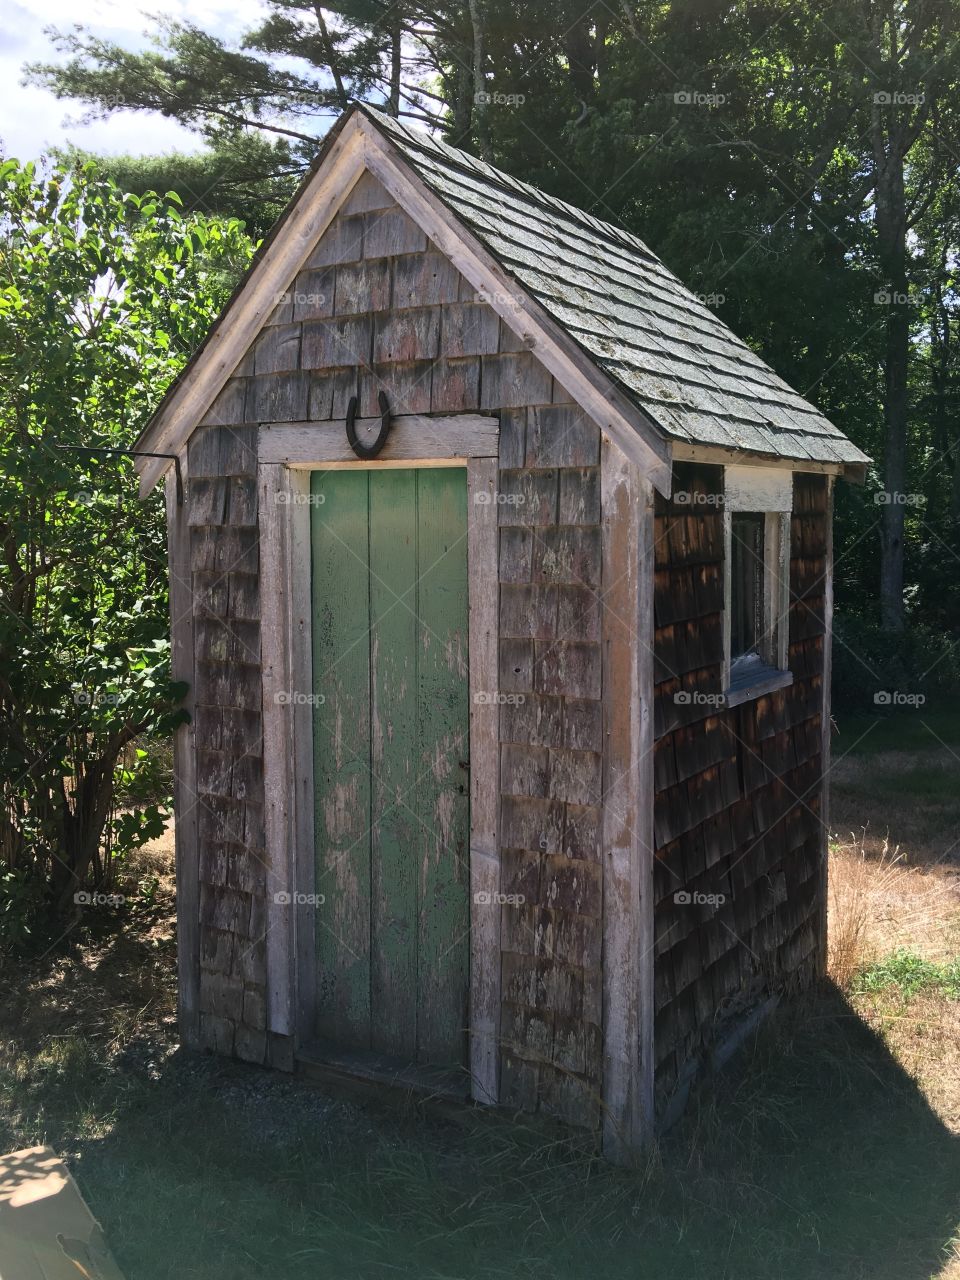 100 year old Outhouse In New England. This was in an old house's backyard, had to take the pic. Notice the horseshoe over the door? It's now going to be used as a shed for tools.